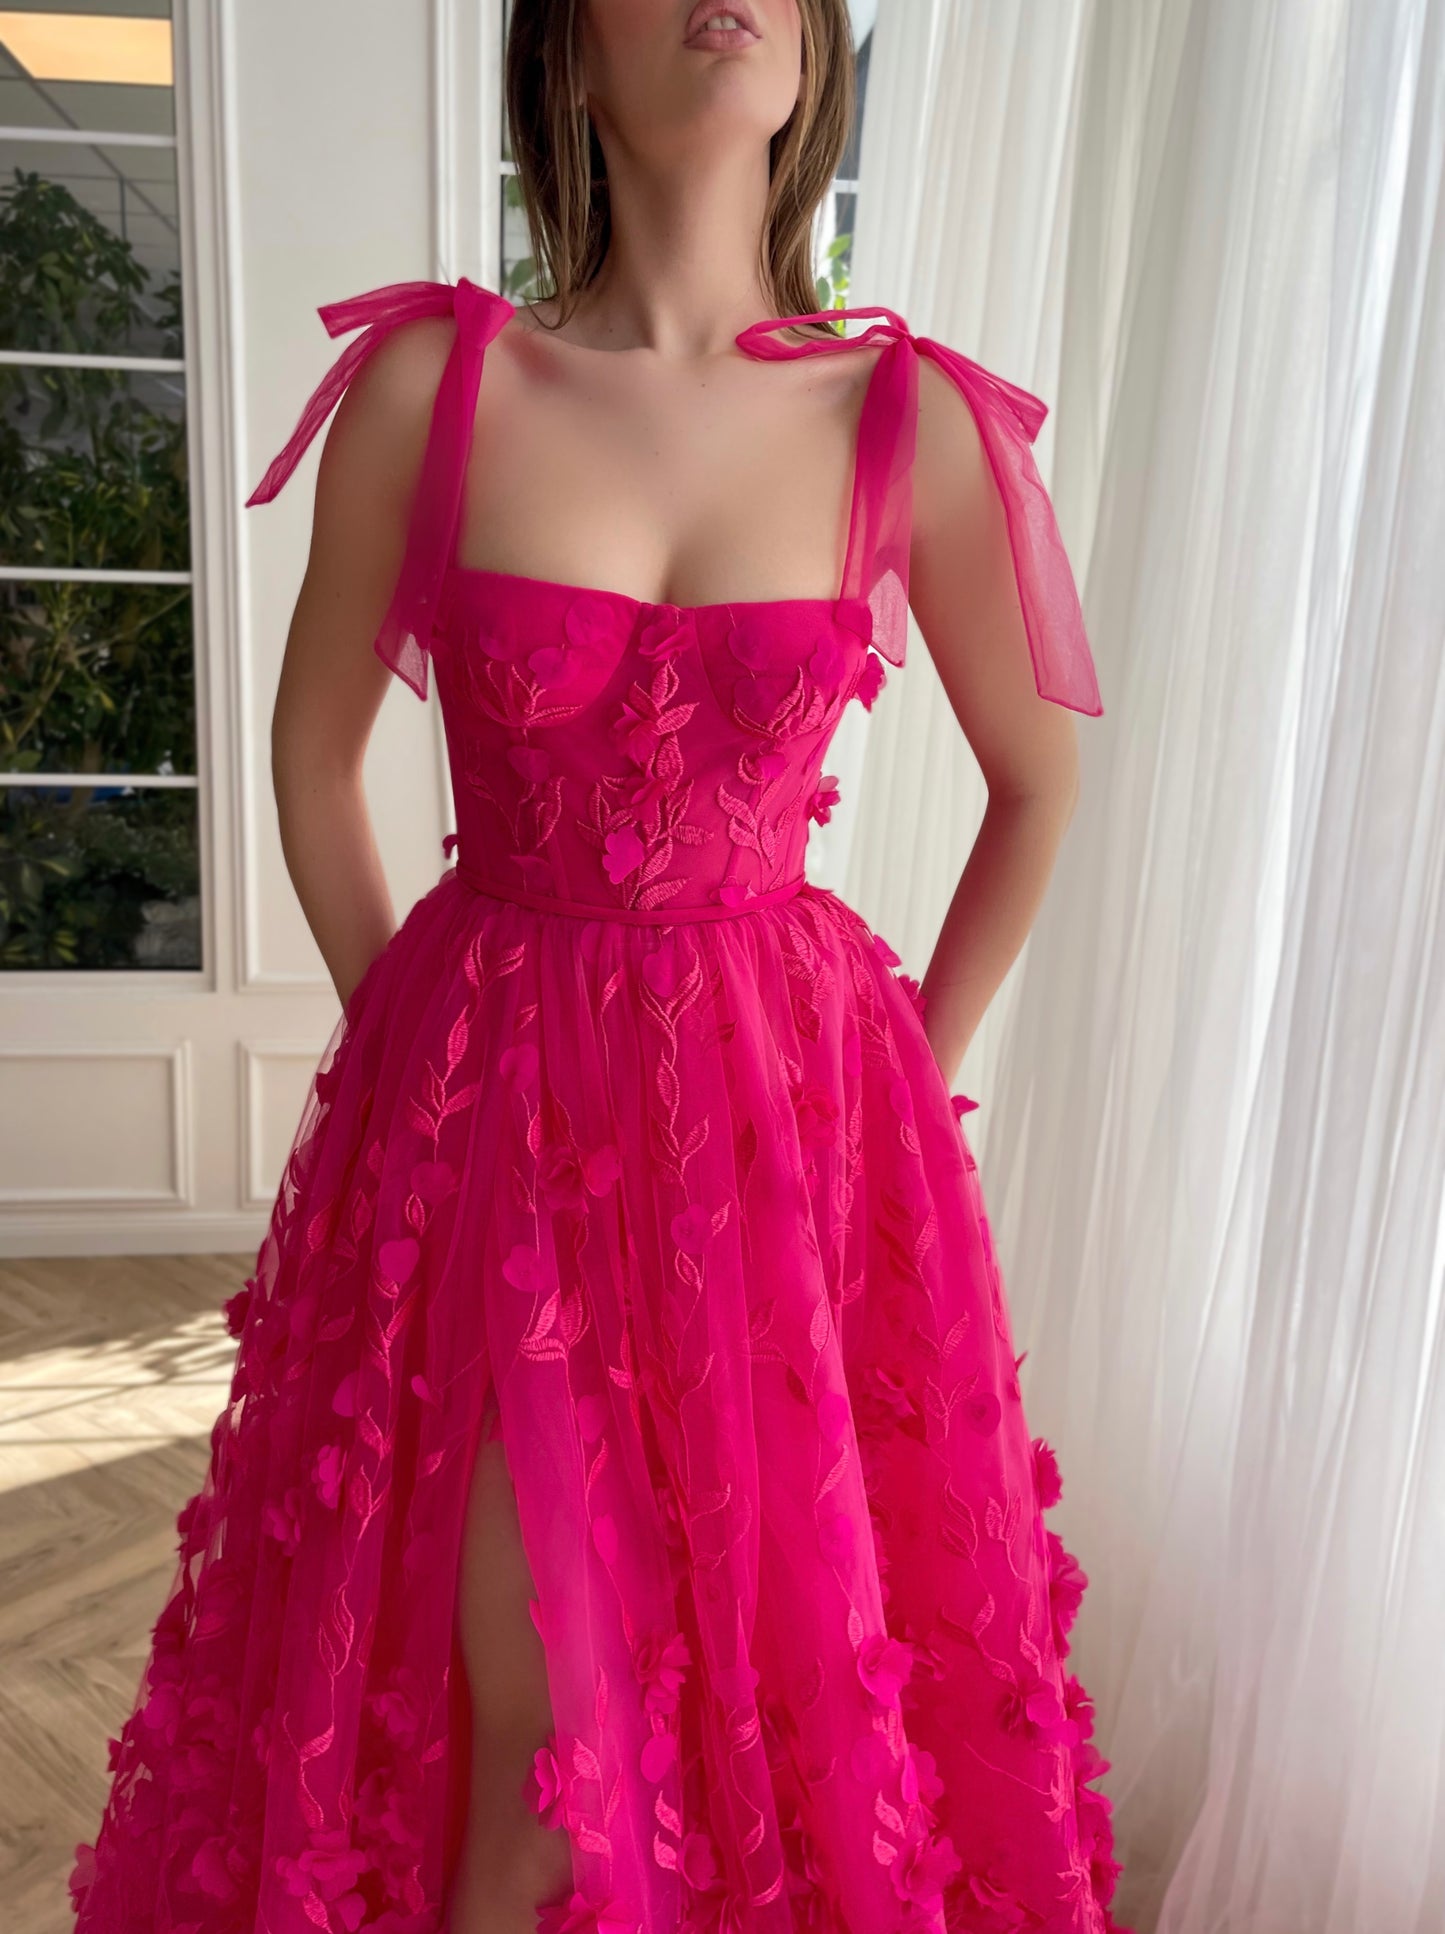 Pink A-Line dress with embroidery and bow straps